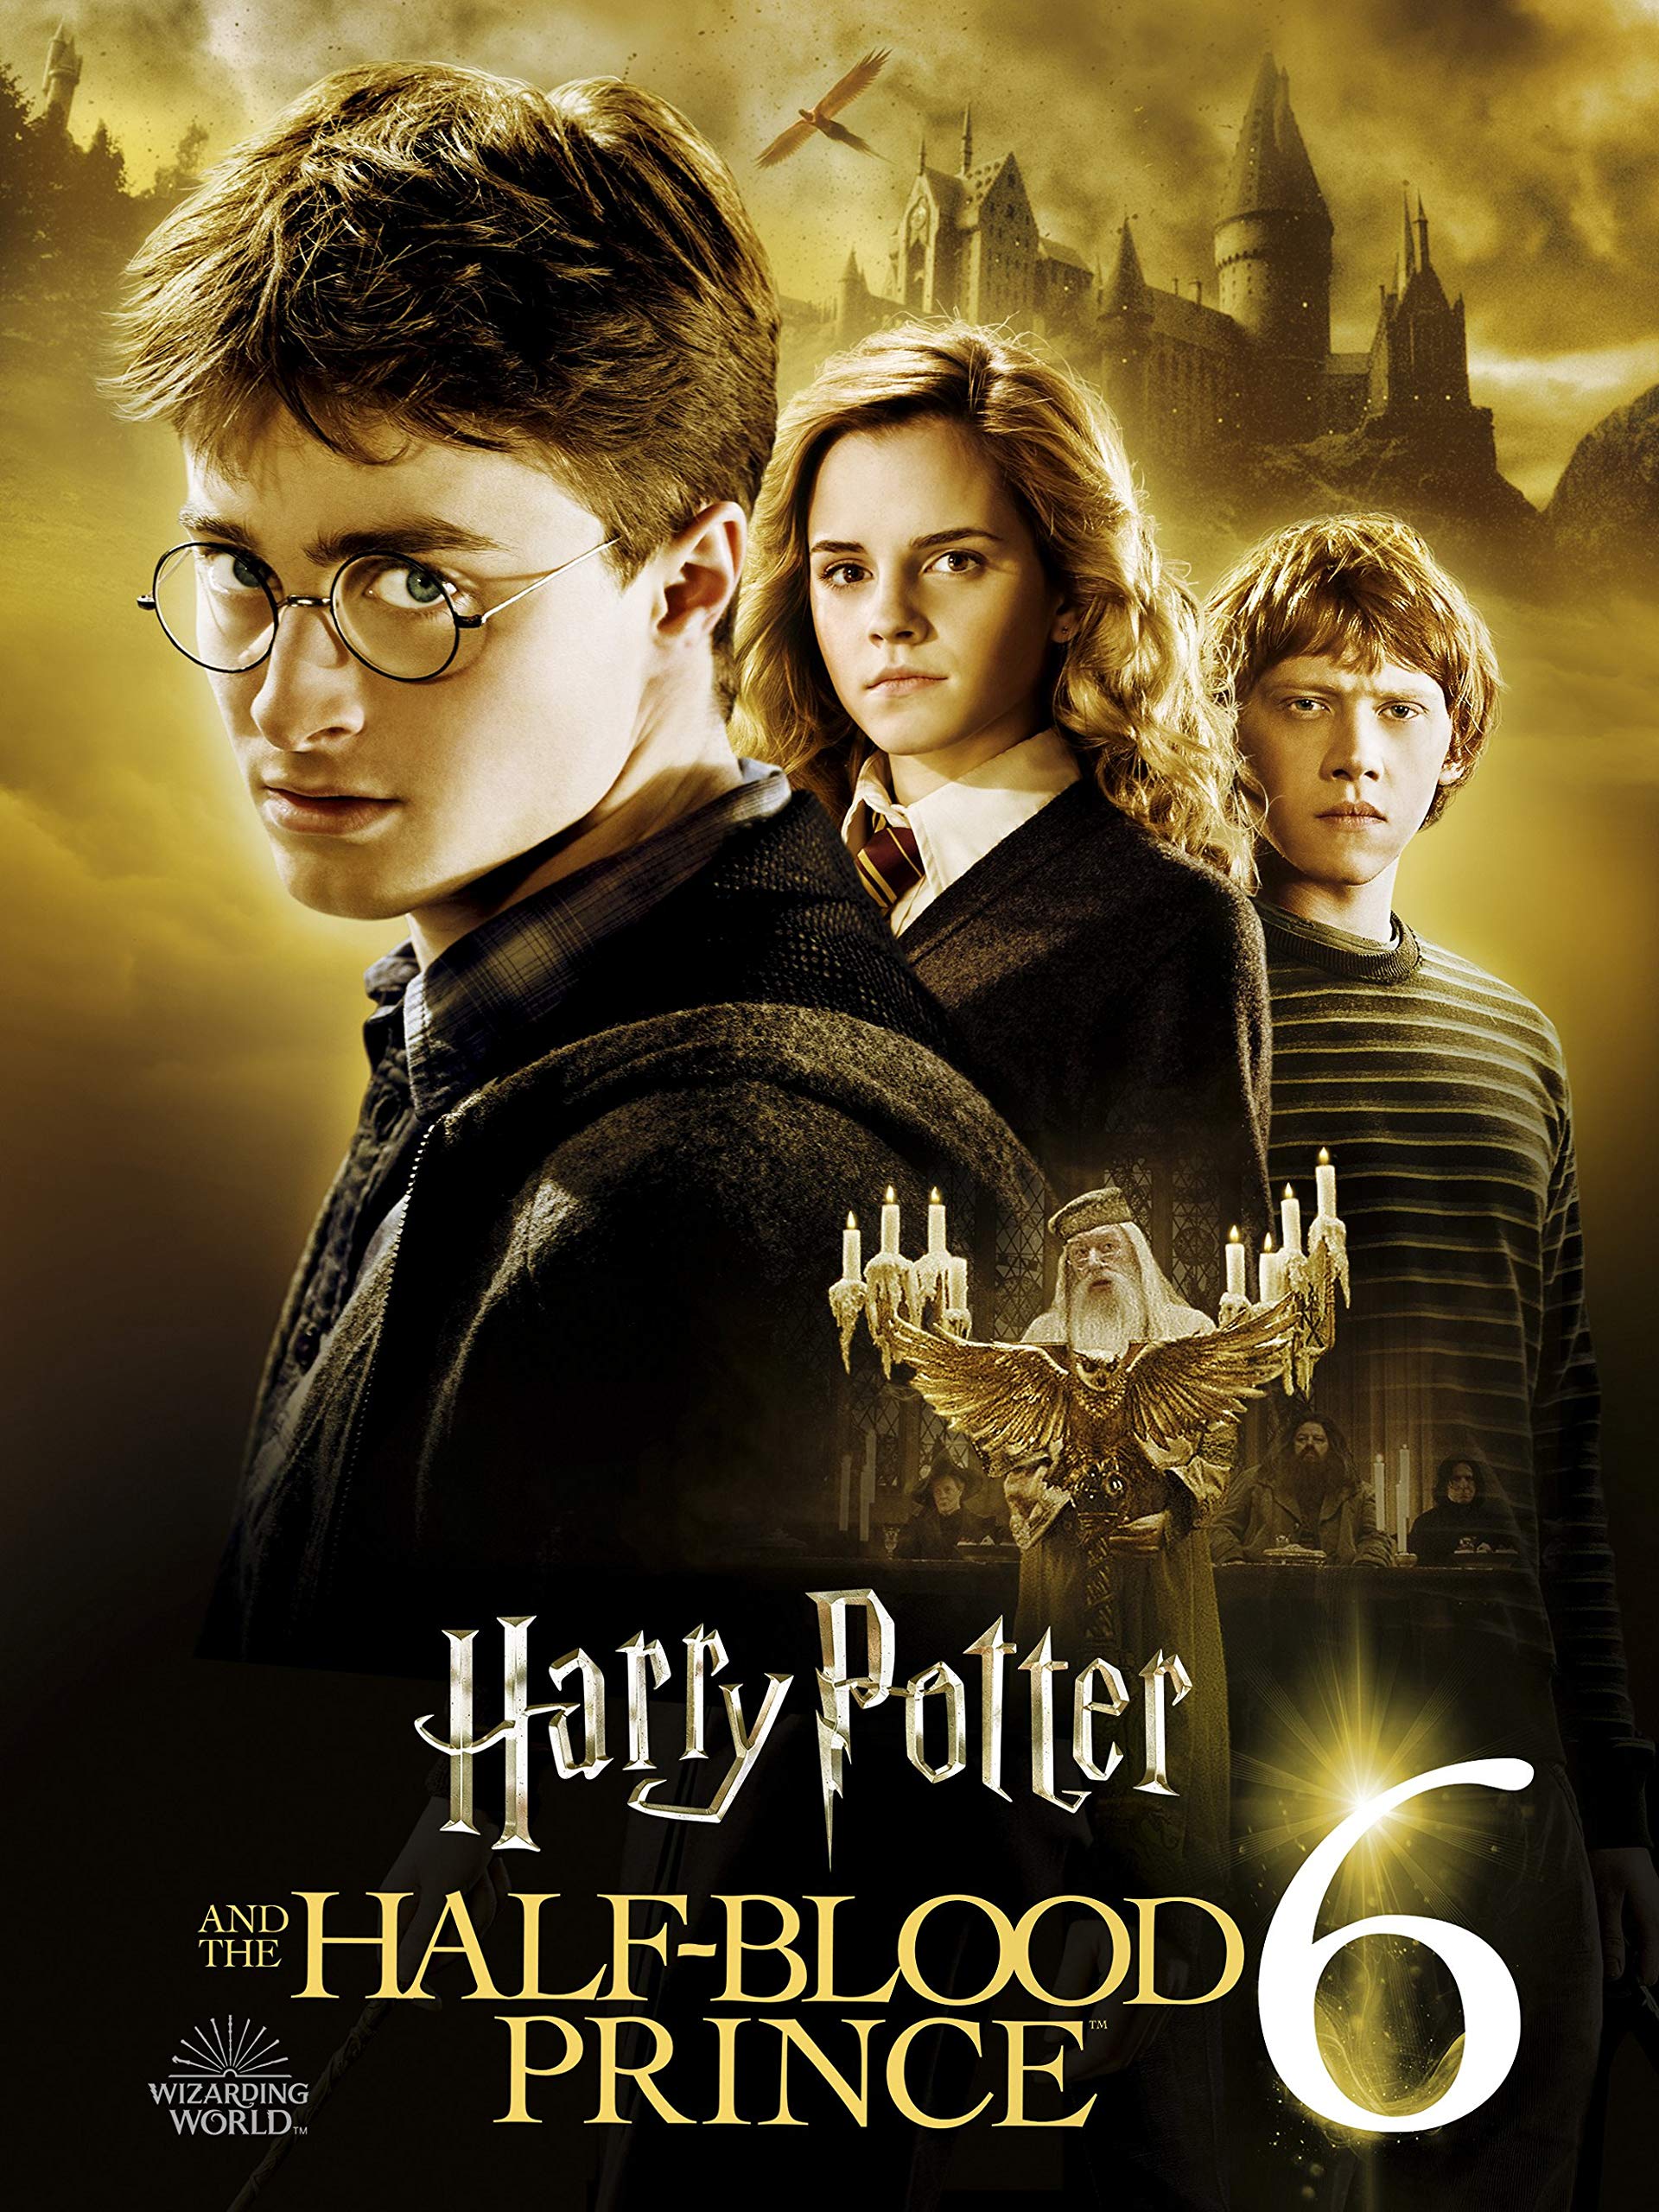 harry potter movies part 8 in hindi download